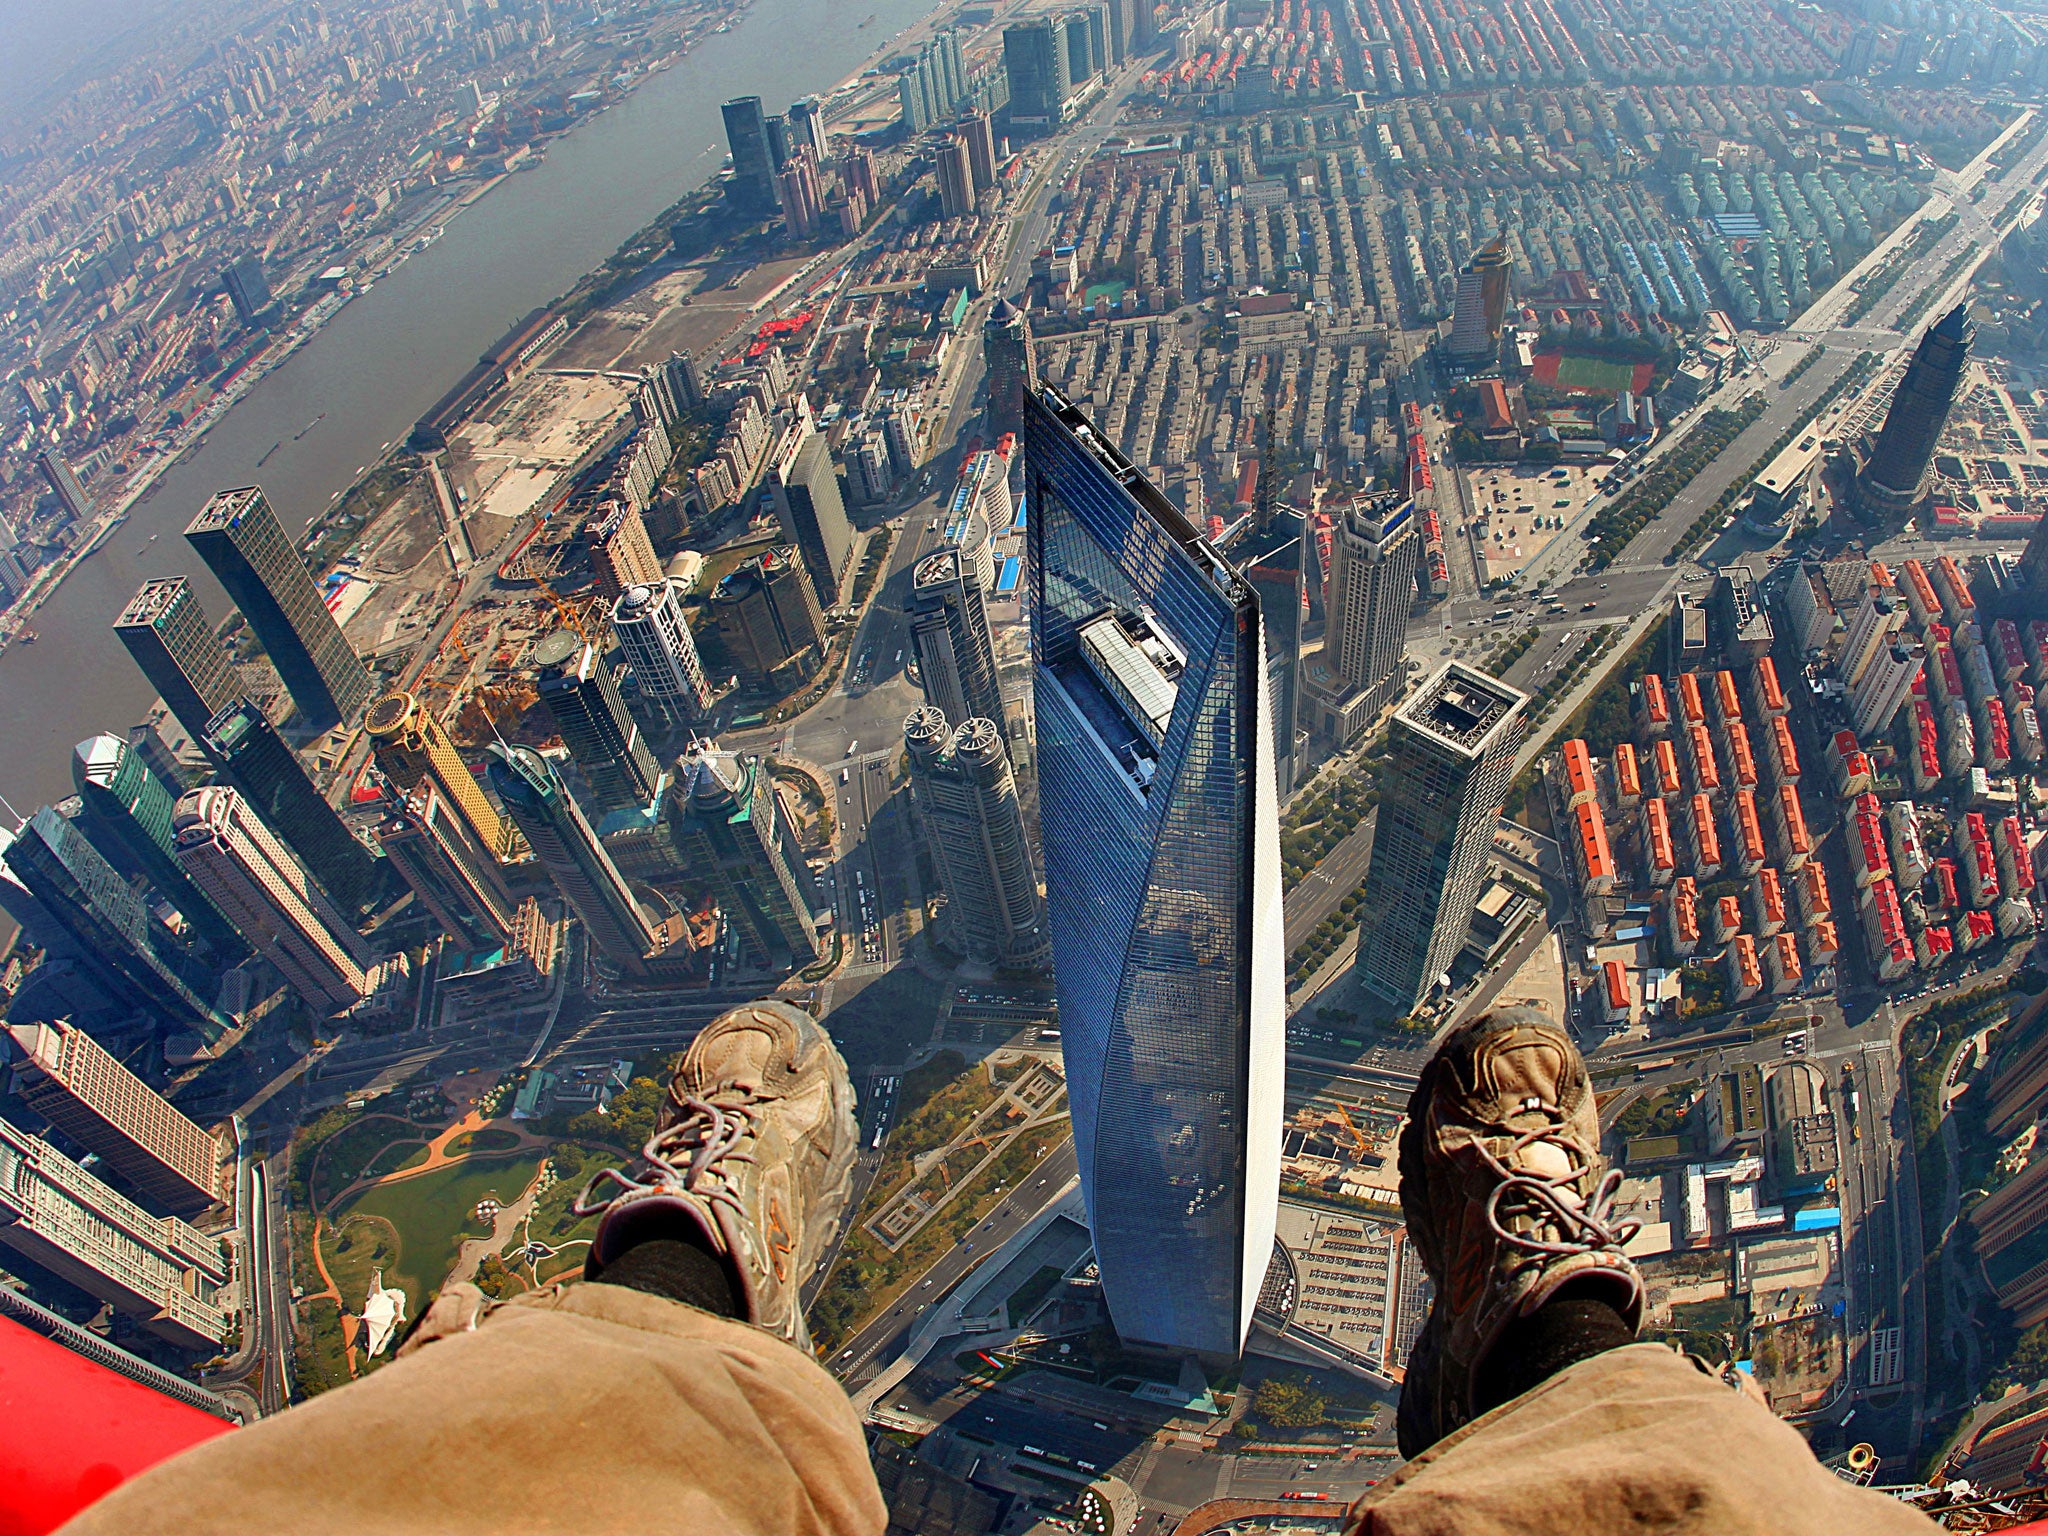 A survey has found that more Britain's suffer from fear of heights than any other phobia